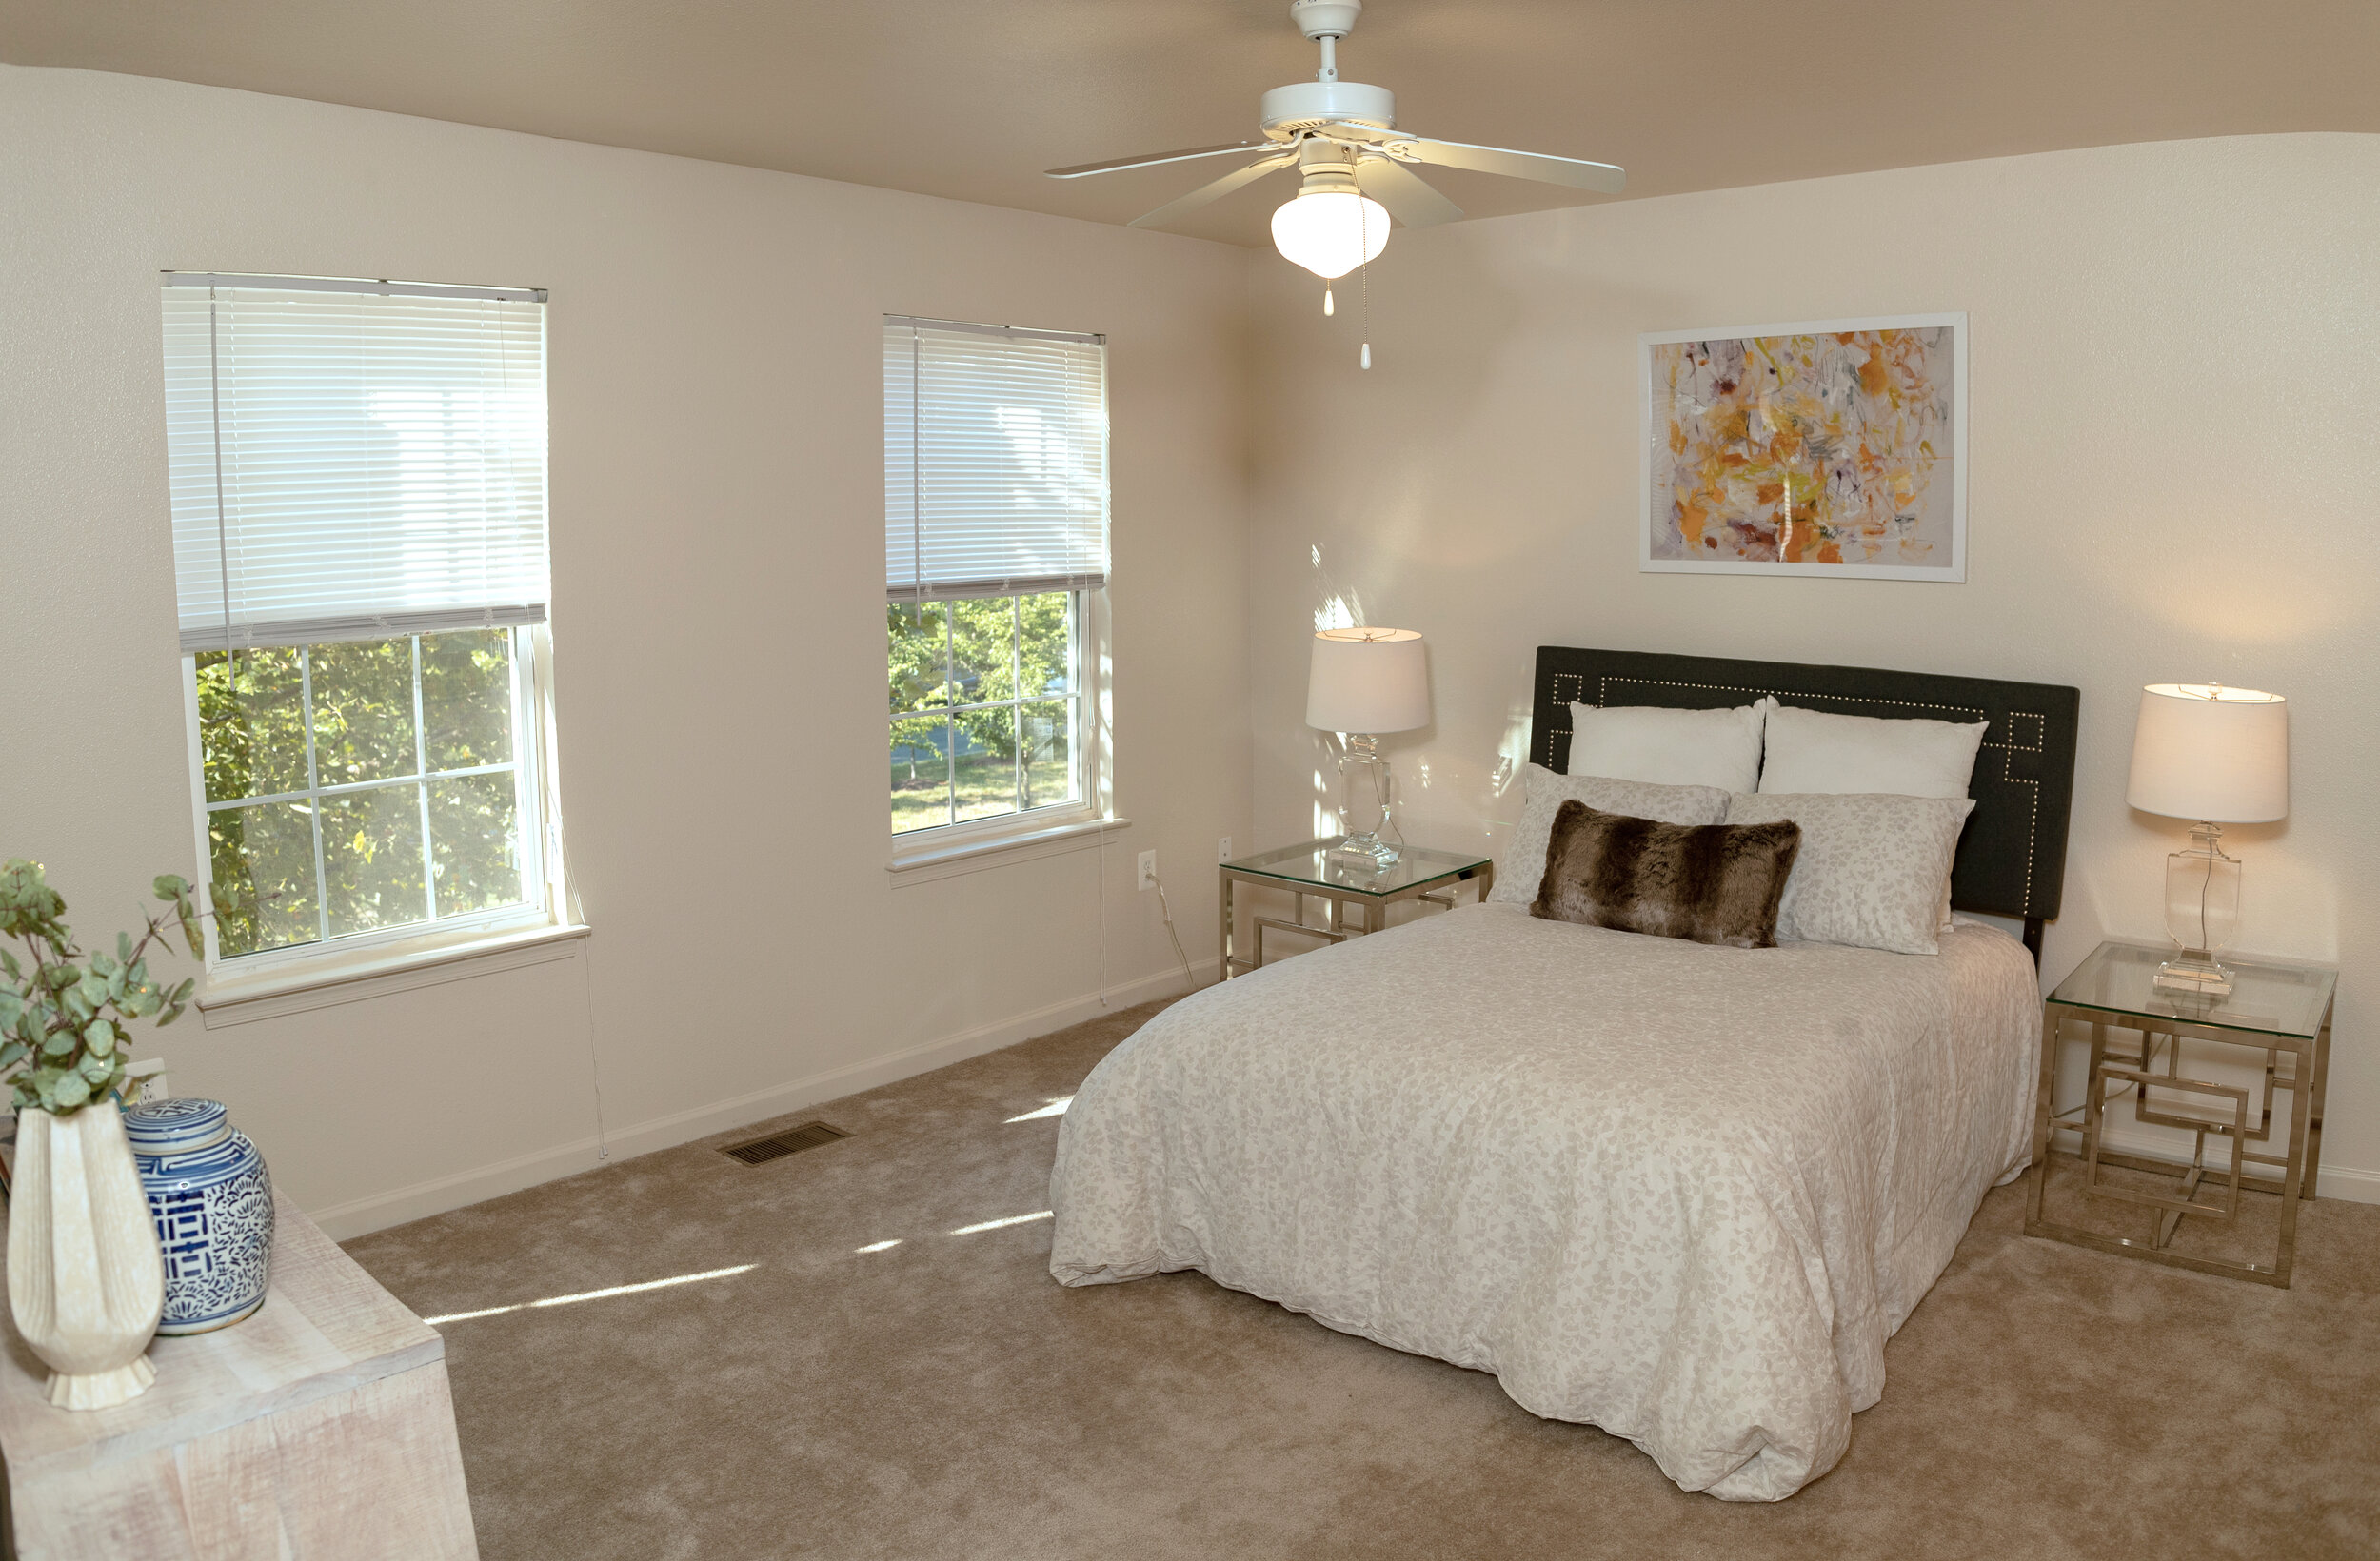 Belvoir offers military housing with ample natural lighting.